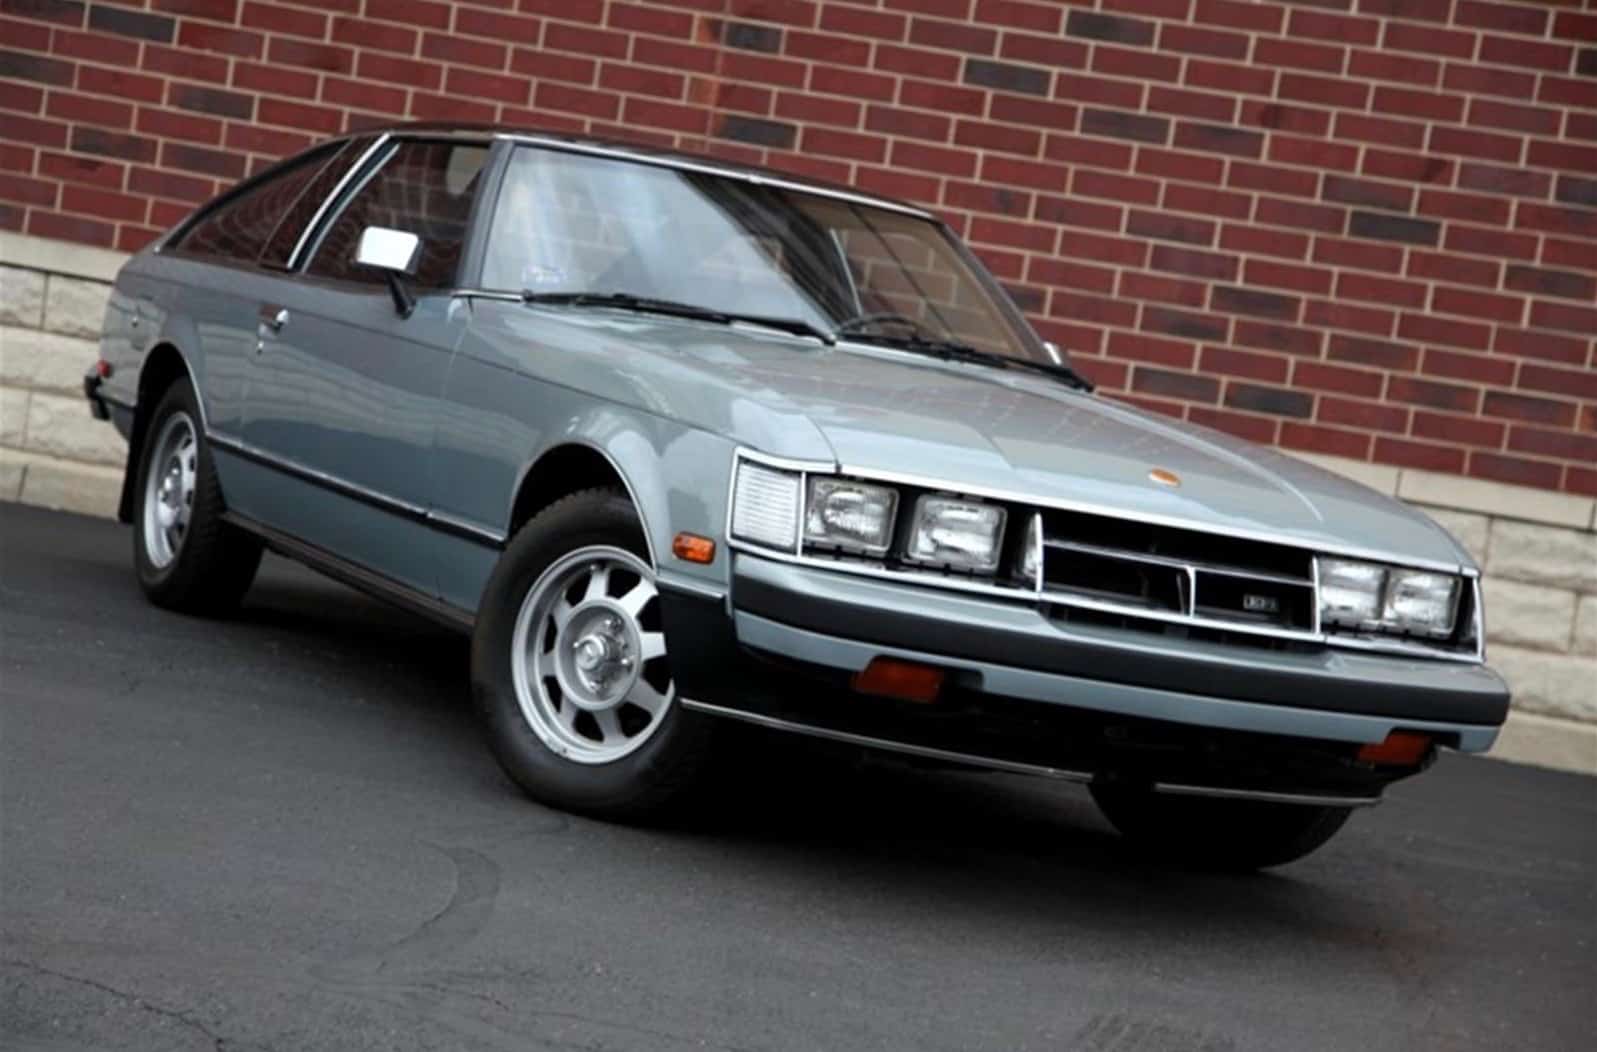  Toyota stretched the Celica so a 6-cylinder engine would fit 